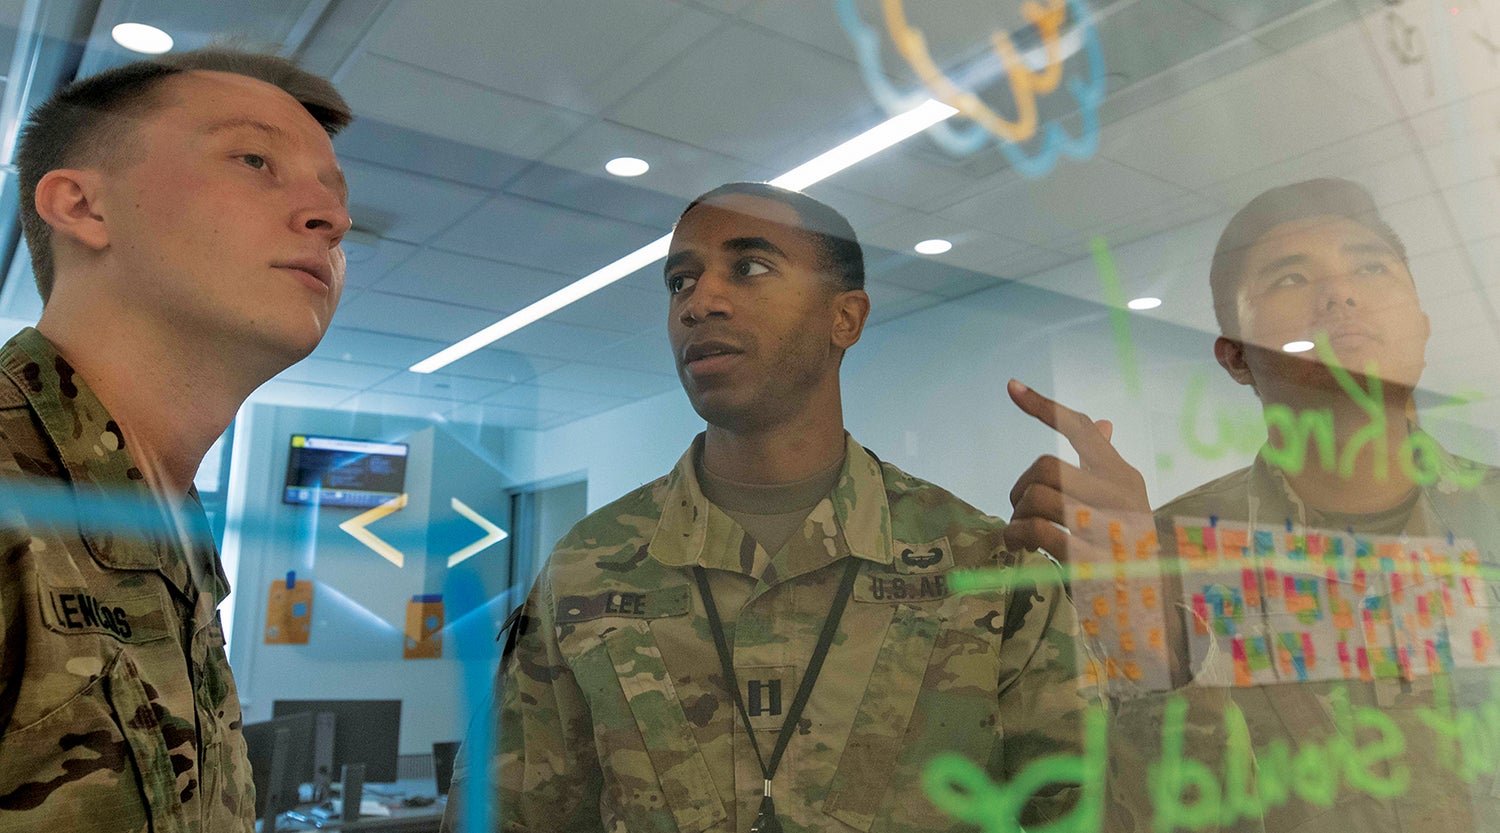 Software Factory members consult on a project. (Credit: U.S. Army)